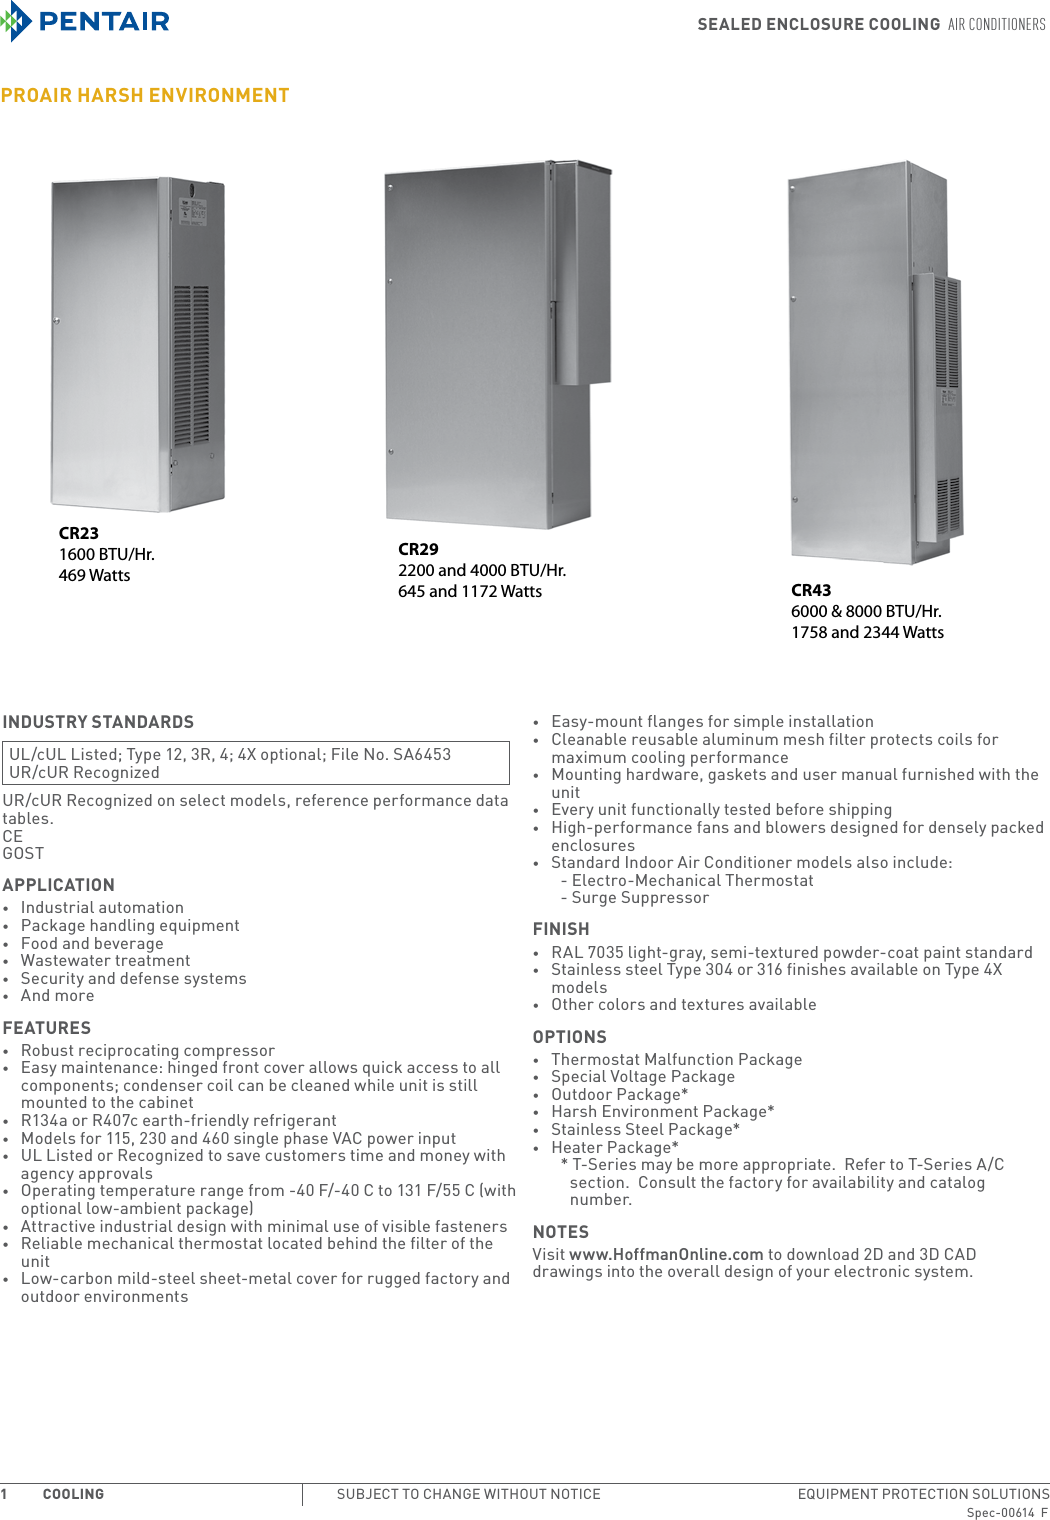 Page 1 of 10 - Air Conditioners  Brochure